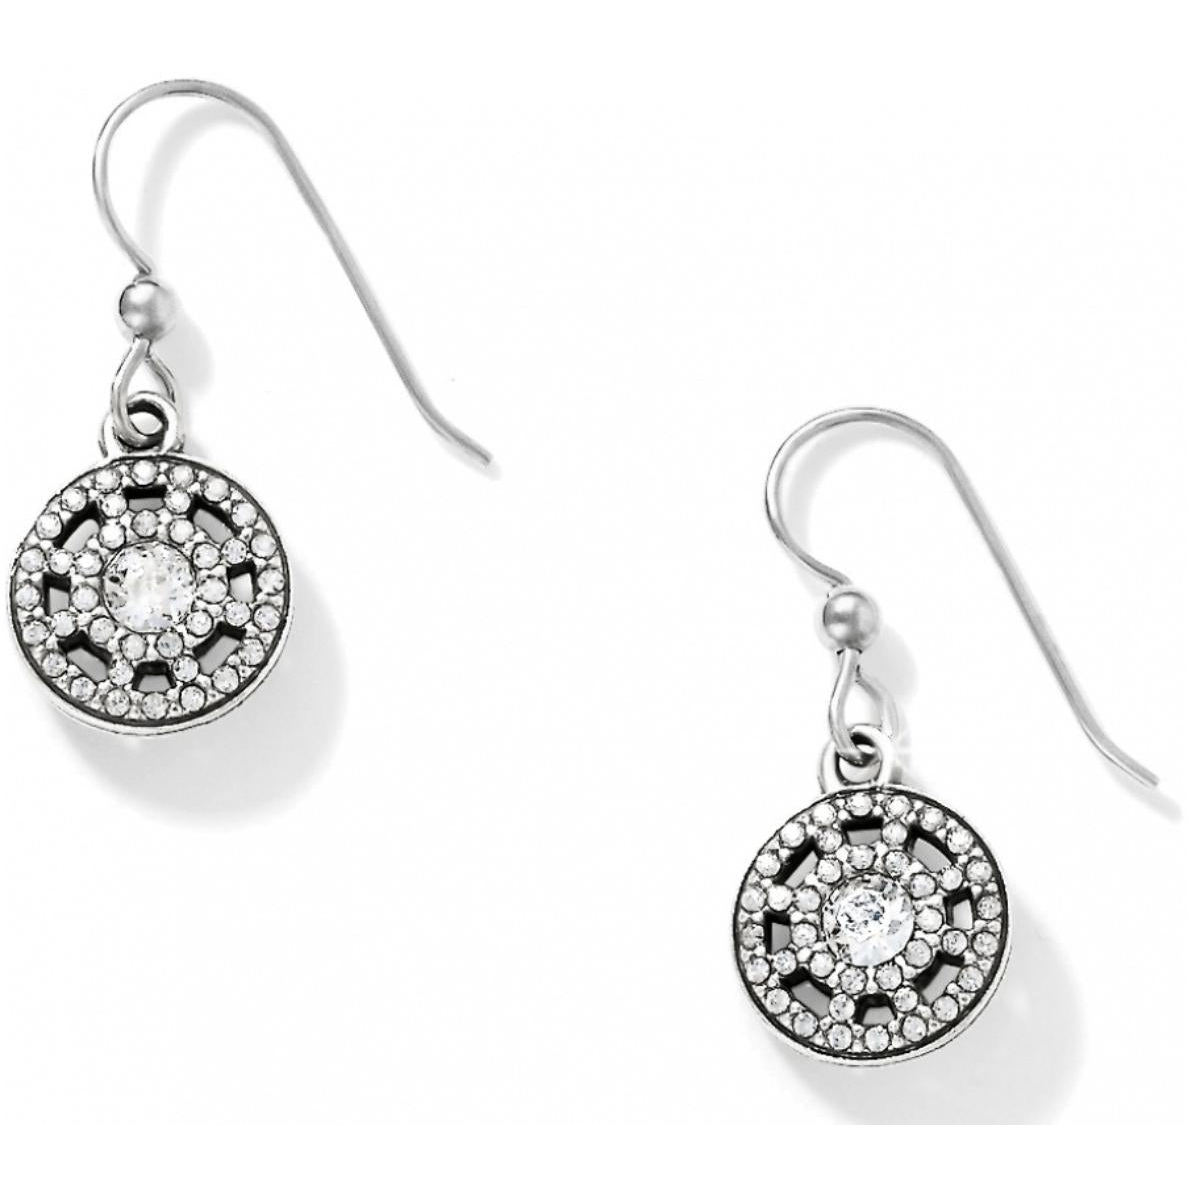 Illumina French Wire Earrings - Zinnias Gift Boutique